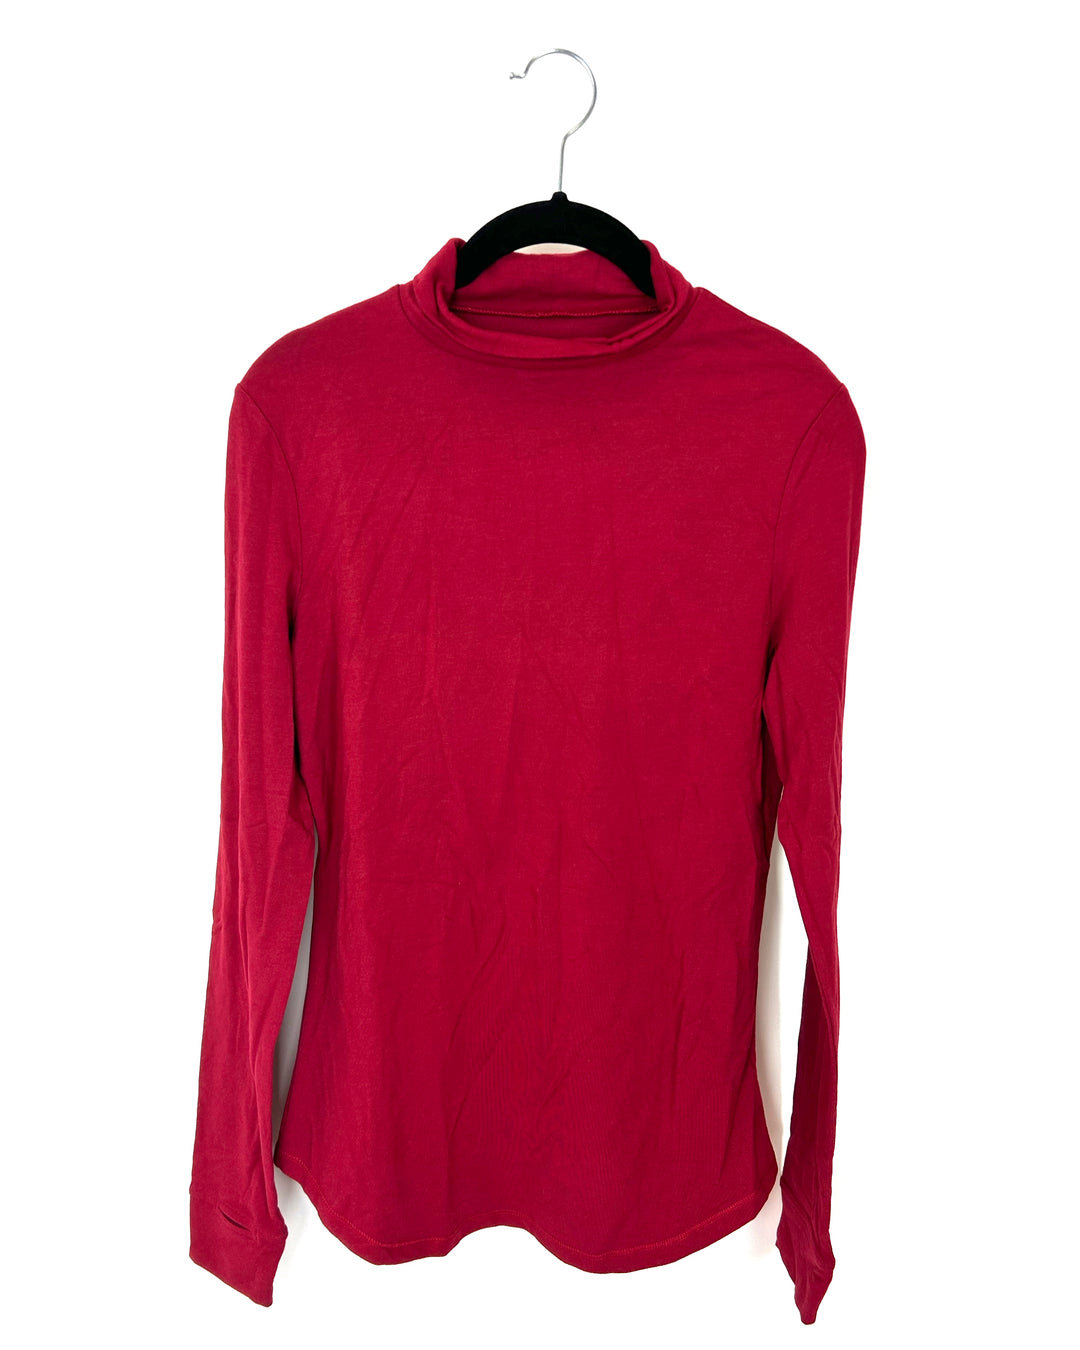 Red Long Sleeve Turtleneck Top - Size 4/6